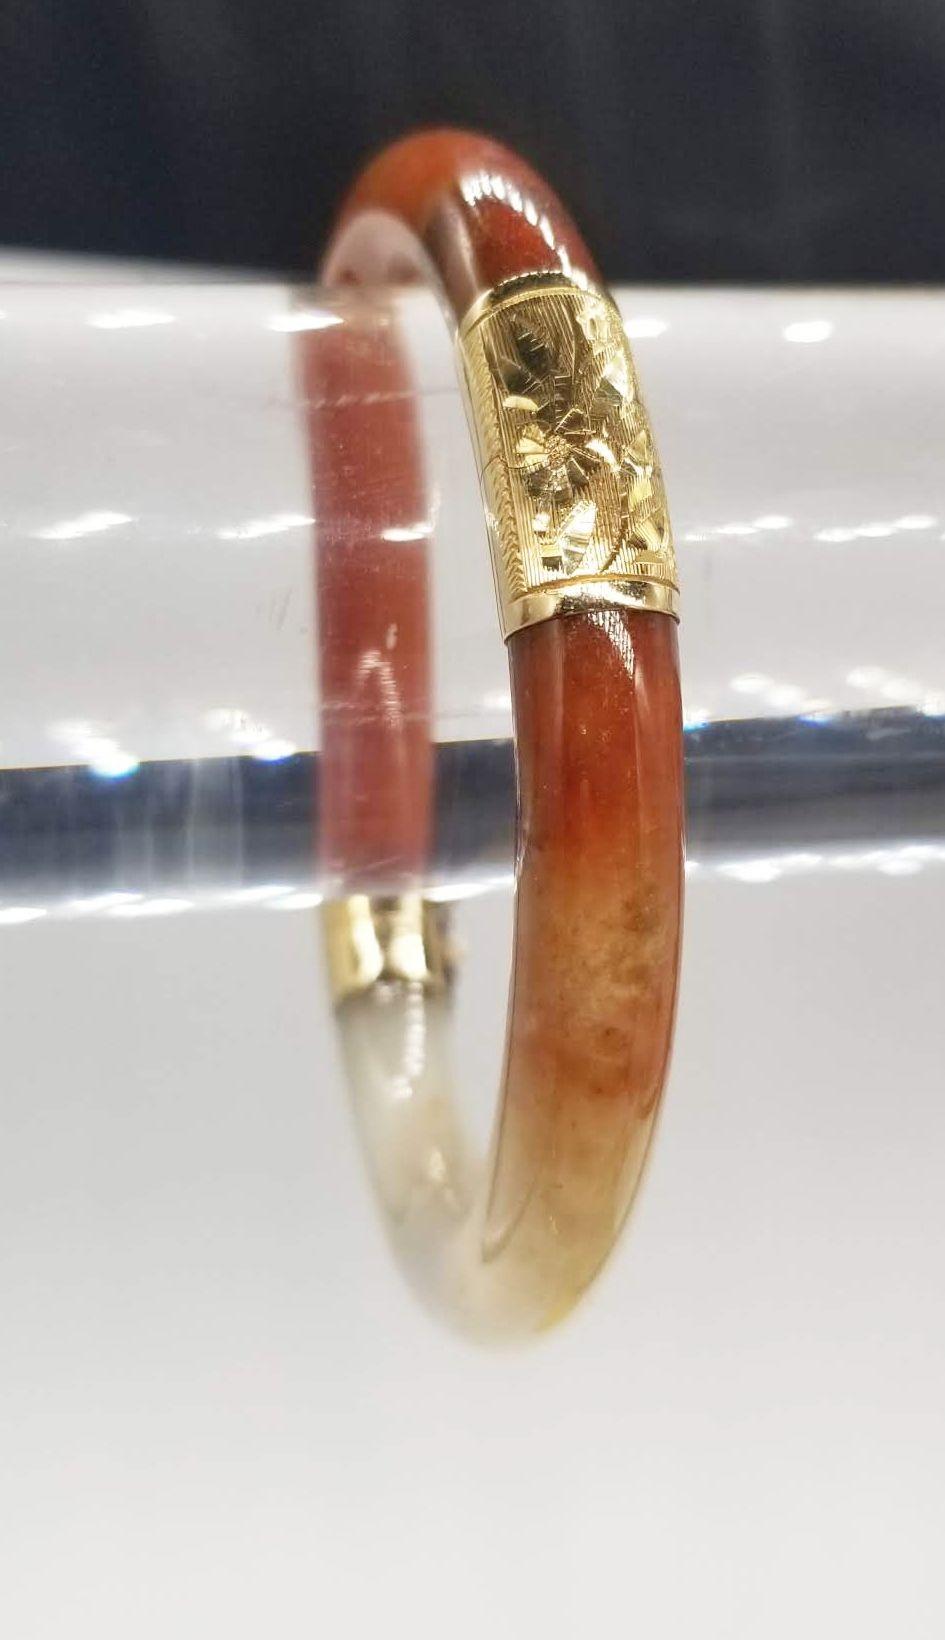 This exquisite vintage bangle bracelet is a true statement piece, featuring a captivating combination of polished red-orange agate and luxurious gold accents. The agate showcases a stunning play of colors, transitioning from deep red and orange